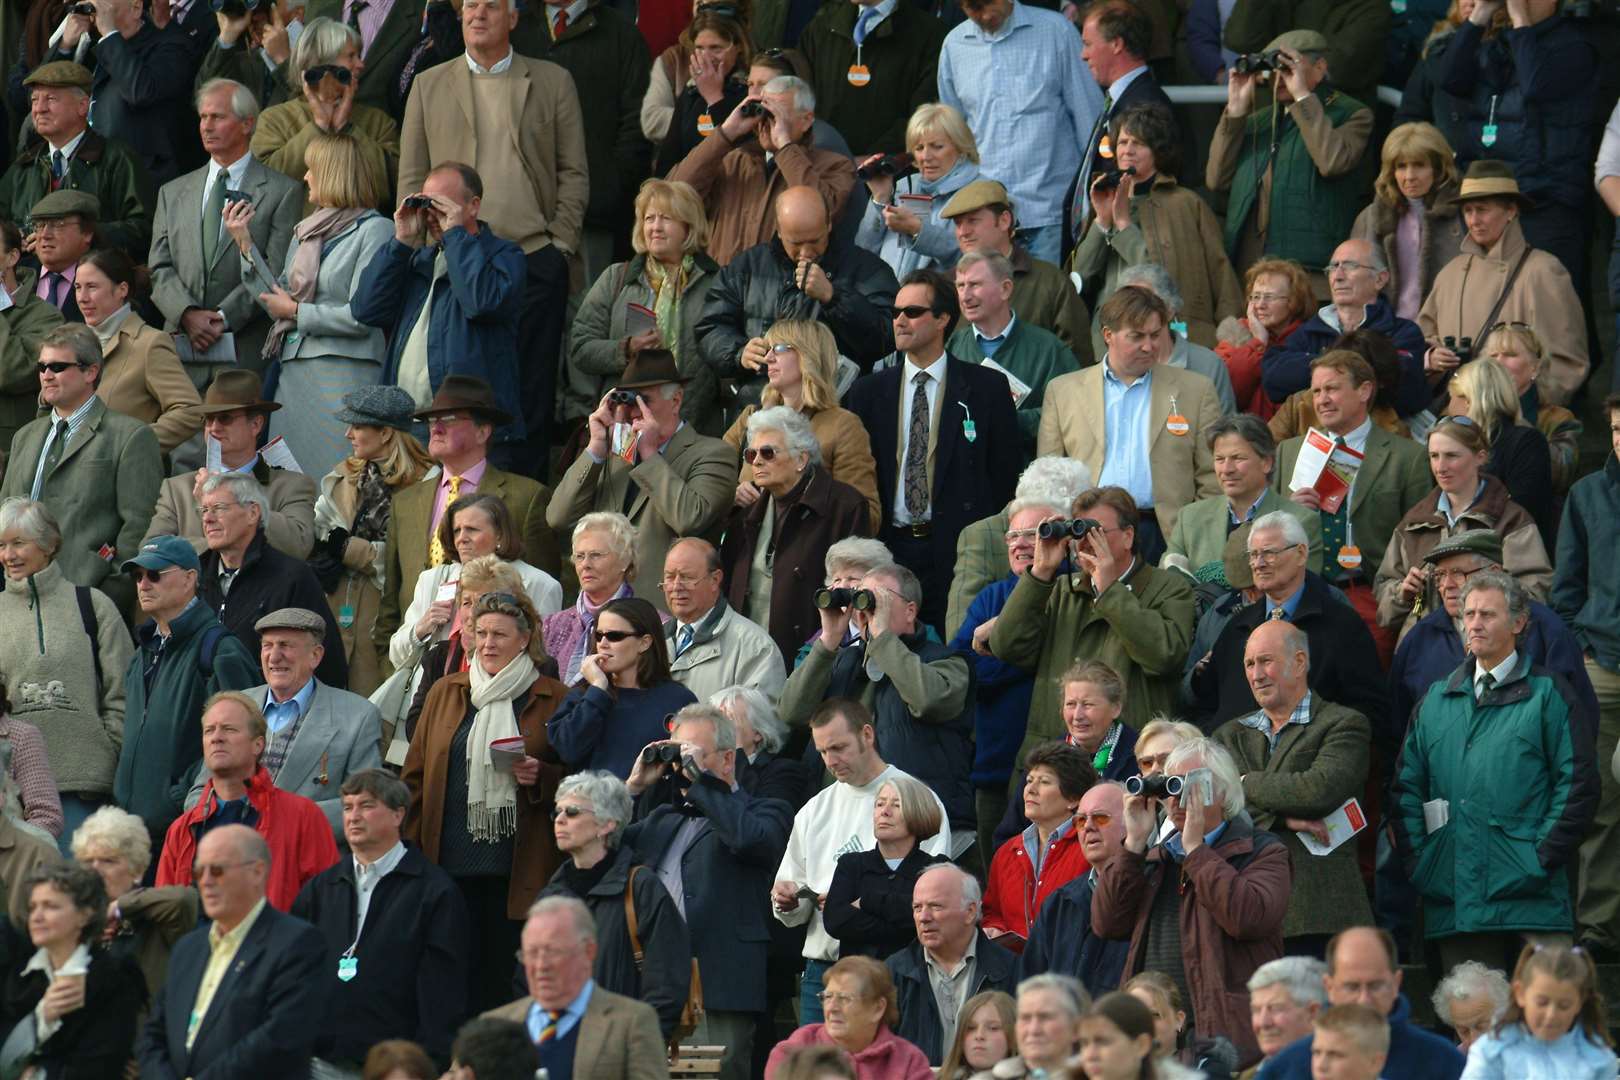 A big crowd enjoying the action in May 2005